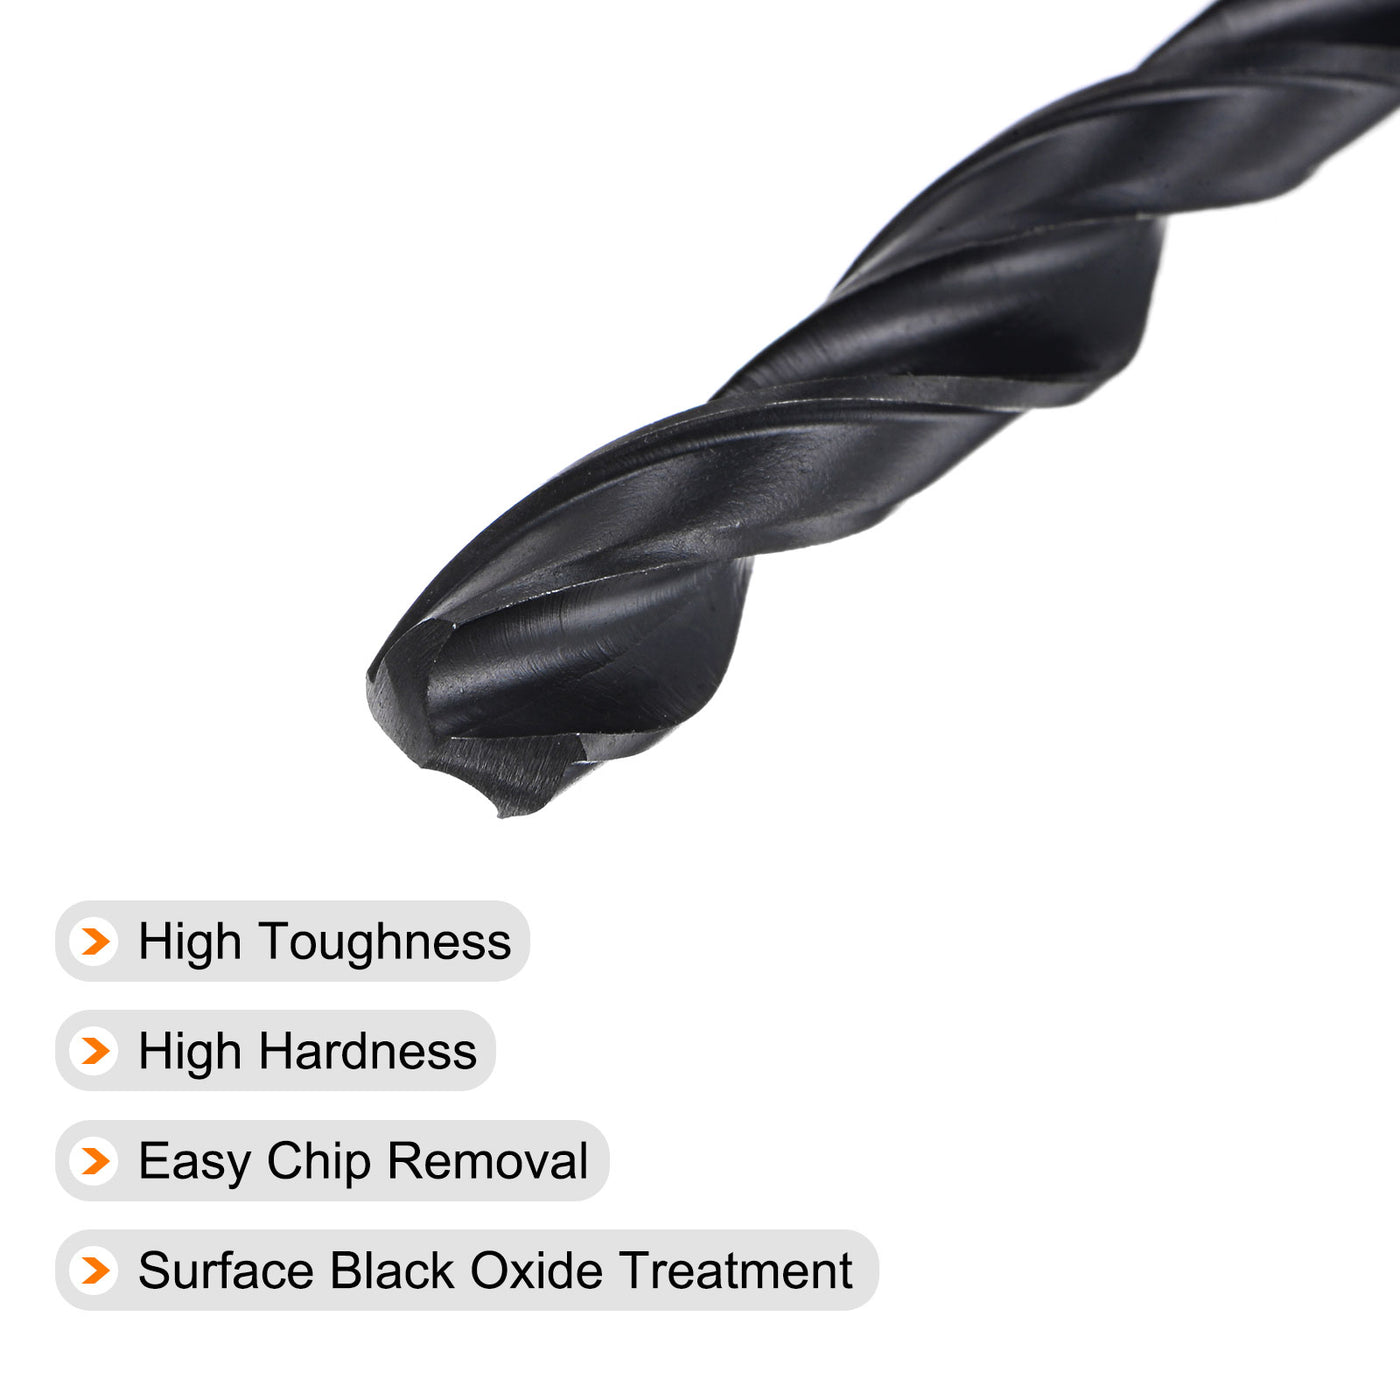 uxcell Uxcell High Speed Steel Twist Drill Bit, 8.4mm Fully Ground Black Oxide 115mm Long 2Pcs